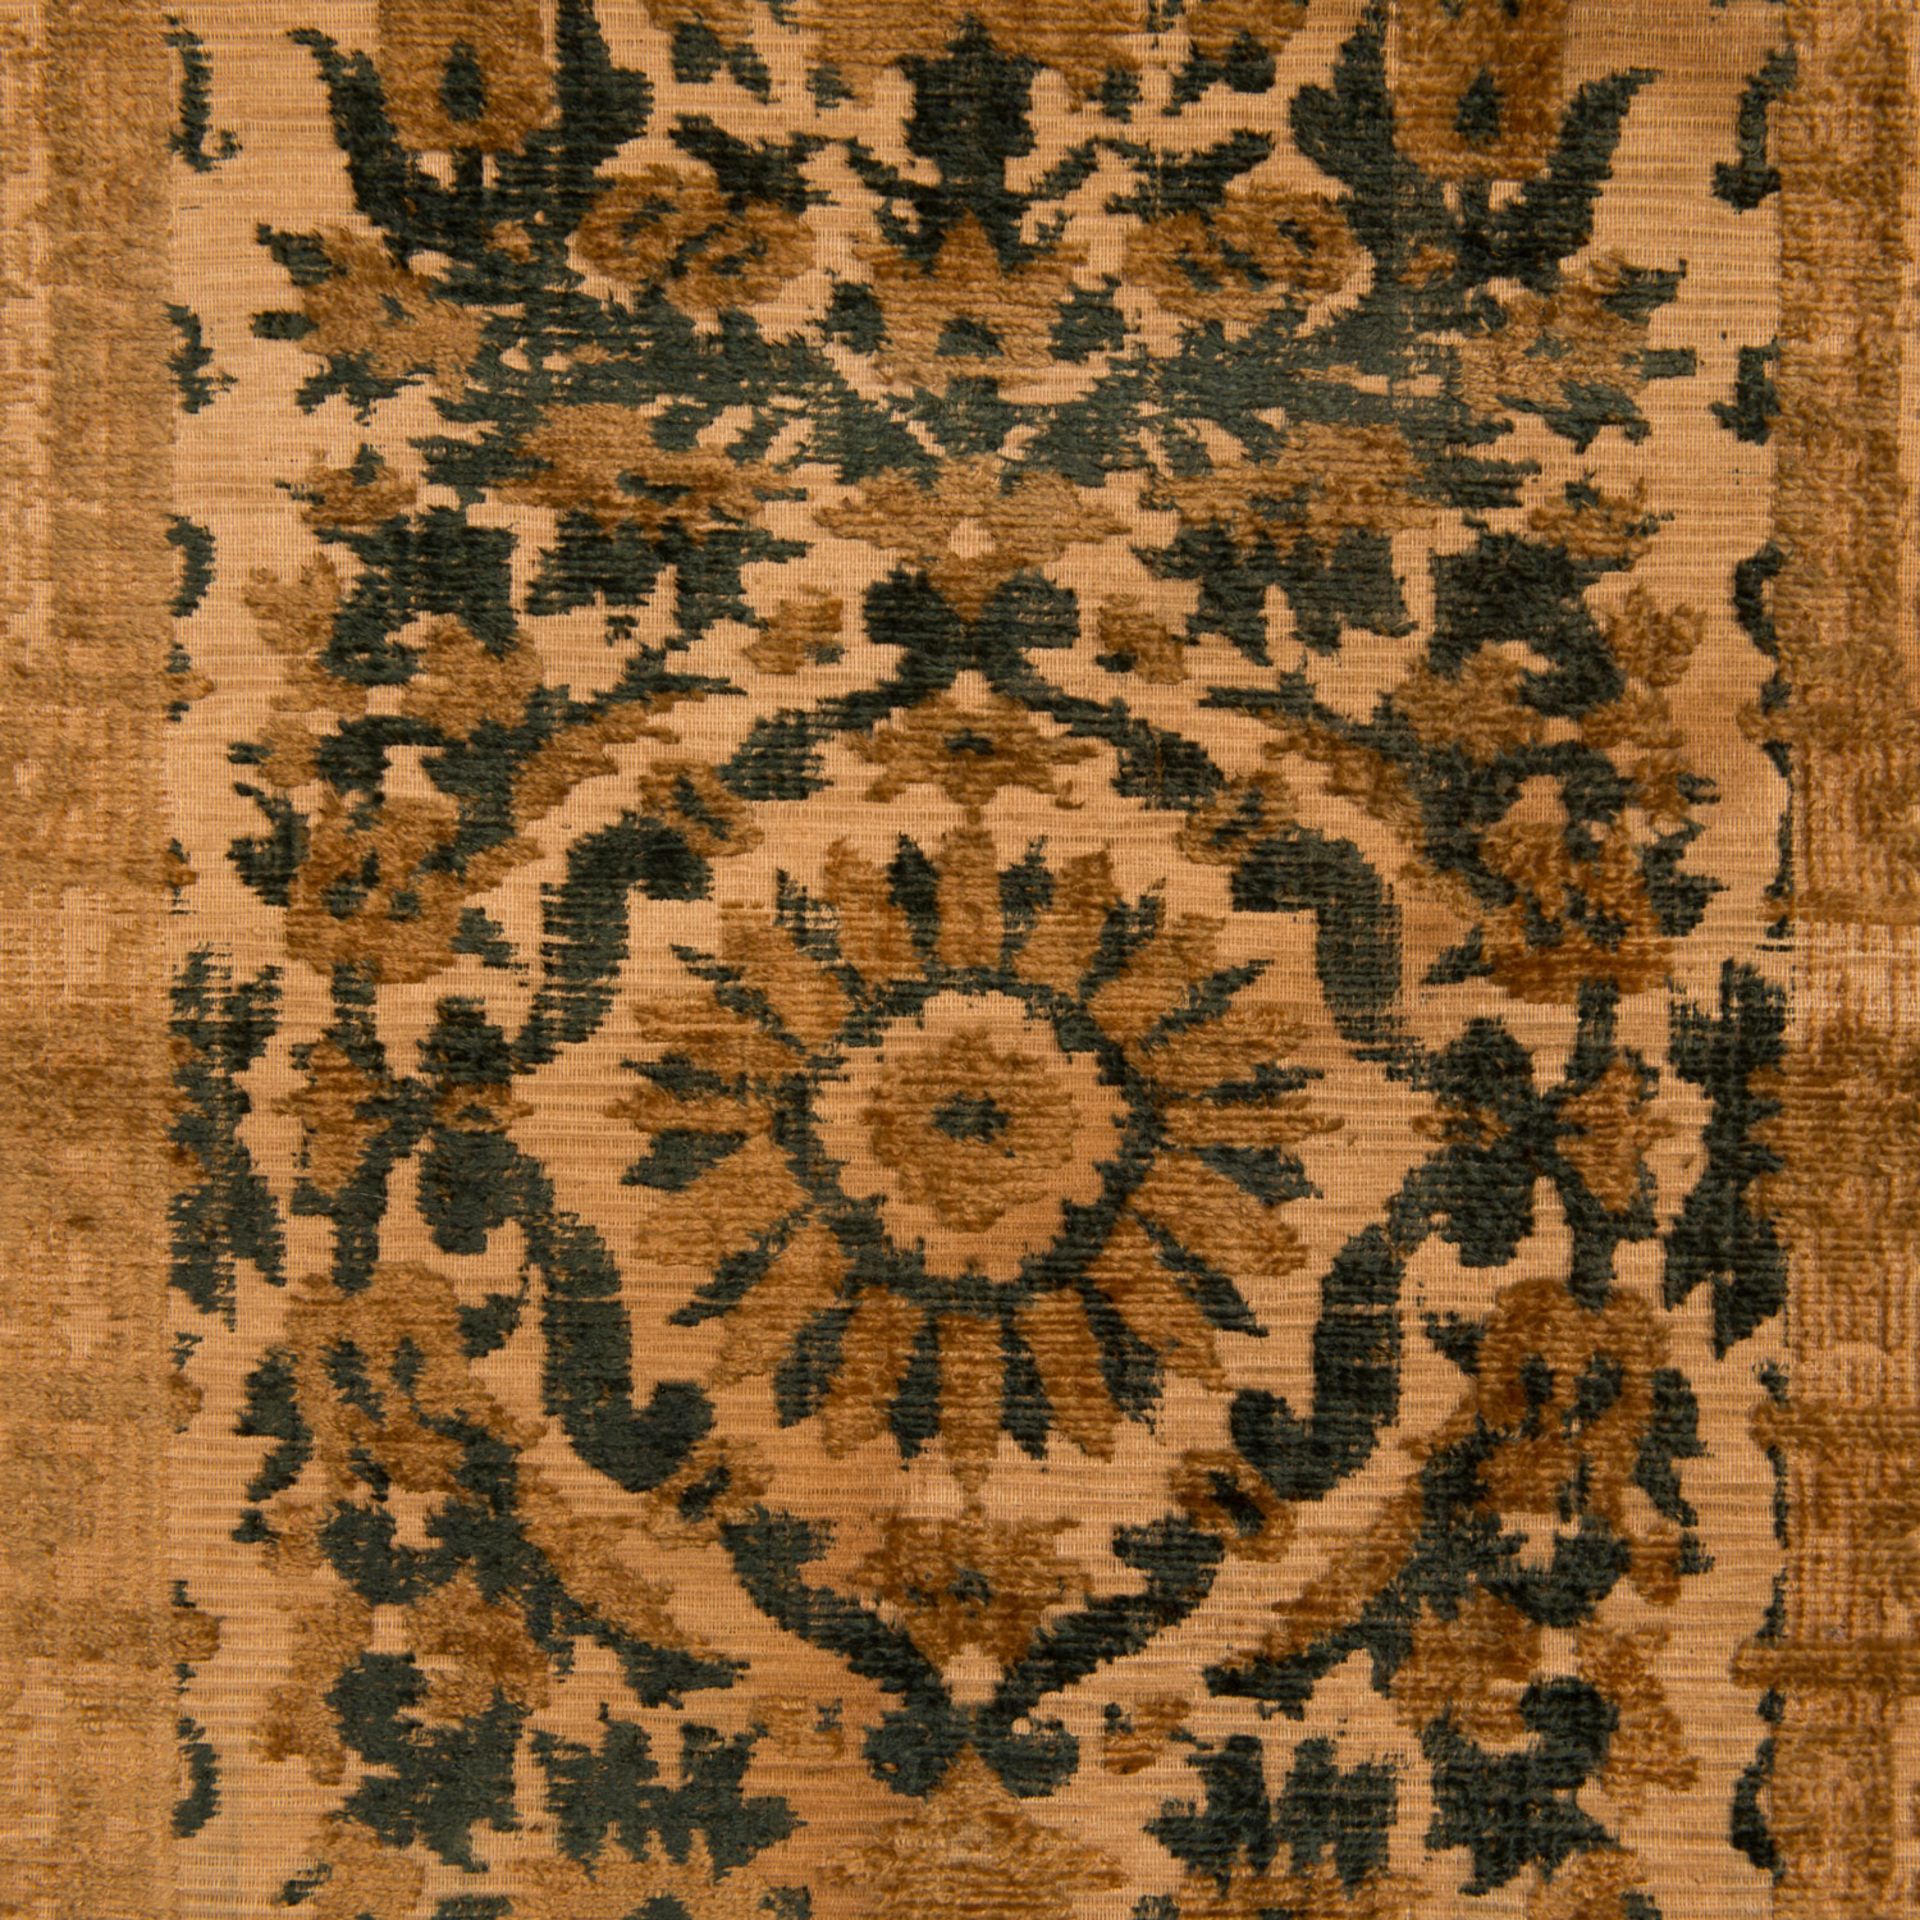 Islamic or Ottoman Embroidery - Image 2 of 3